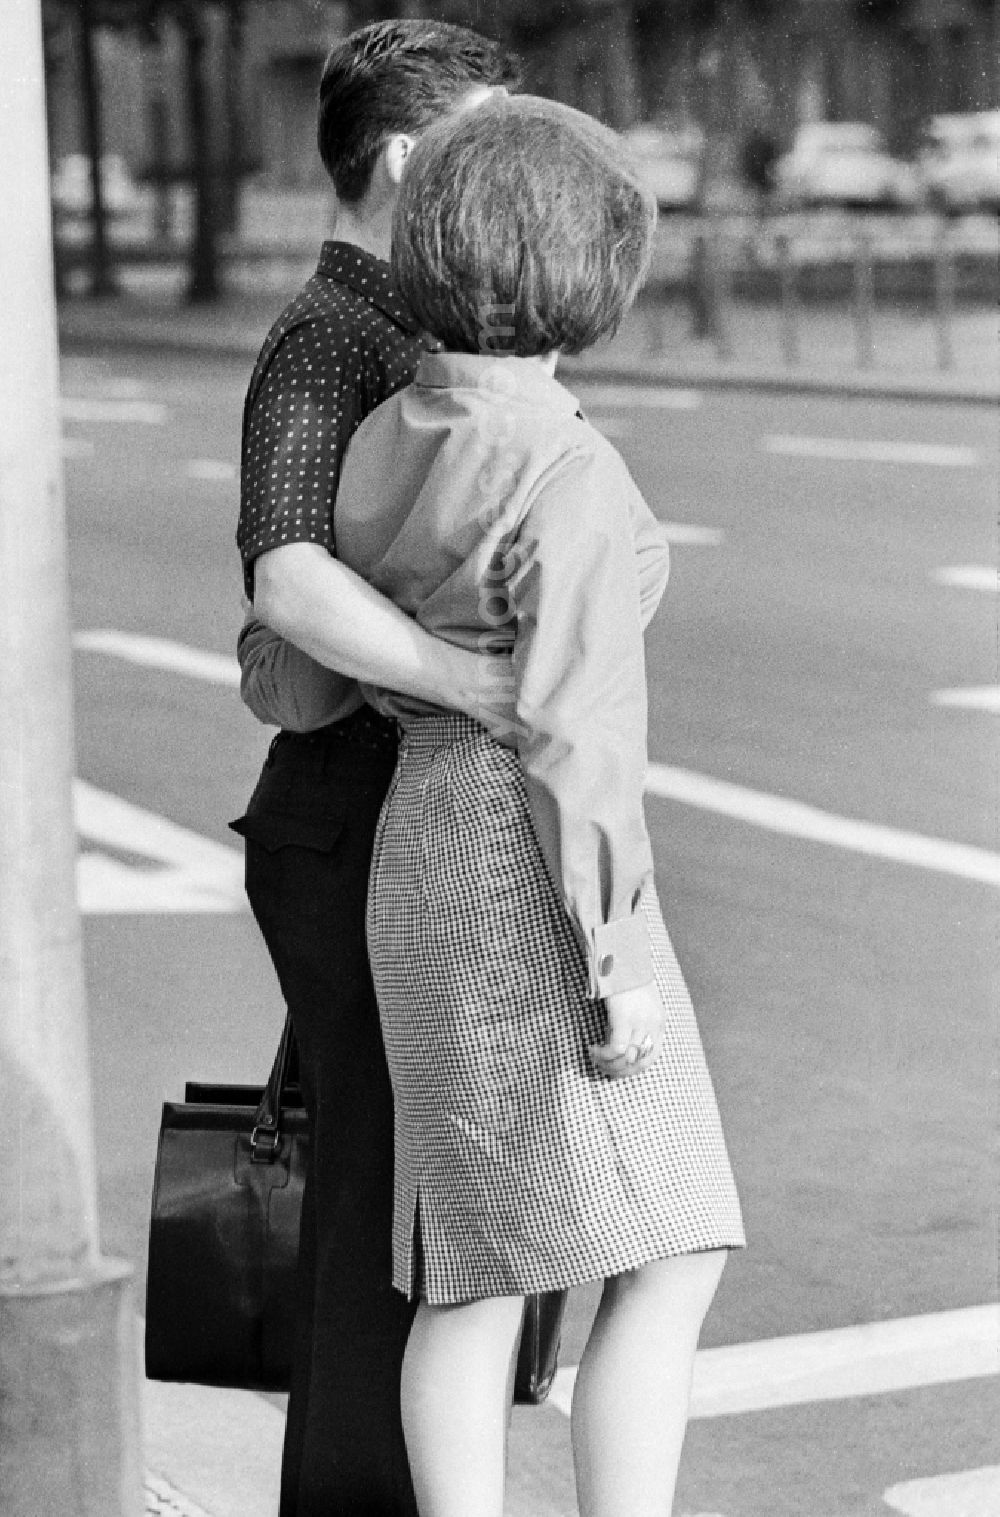 GDR picture archive: Berlin - Enamoured pair in Berlin, the former capital of the GDR, German Democratic Republic